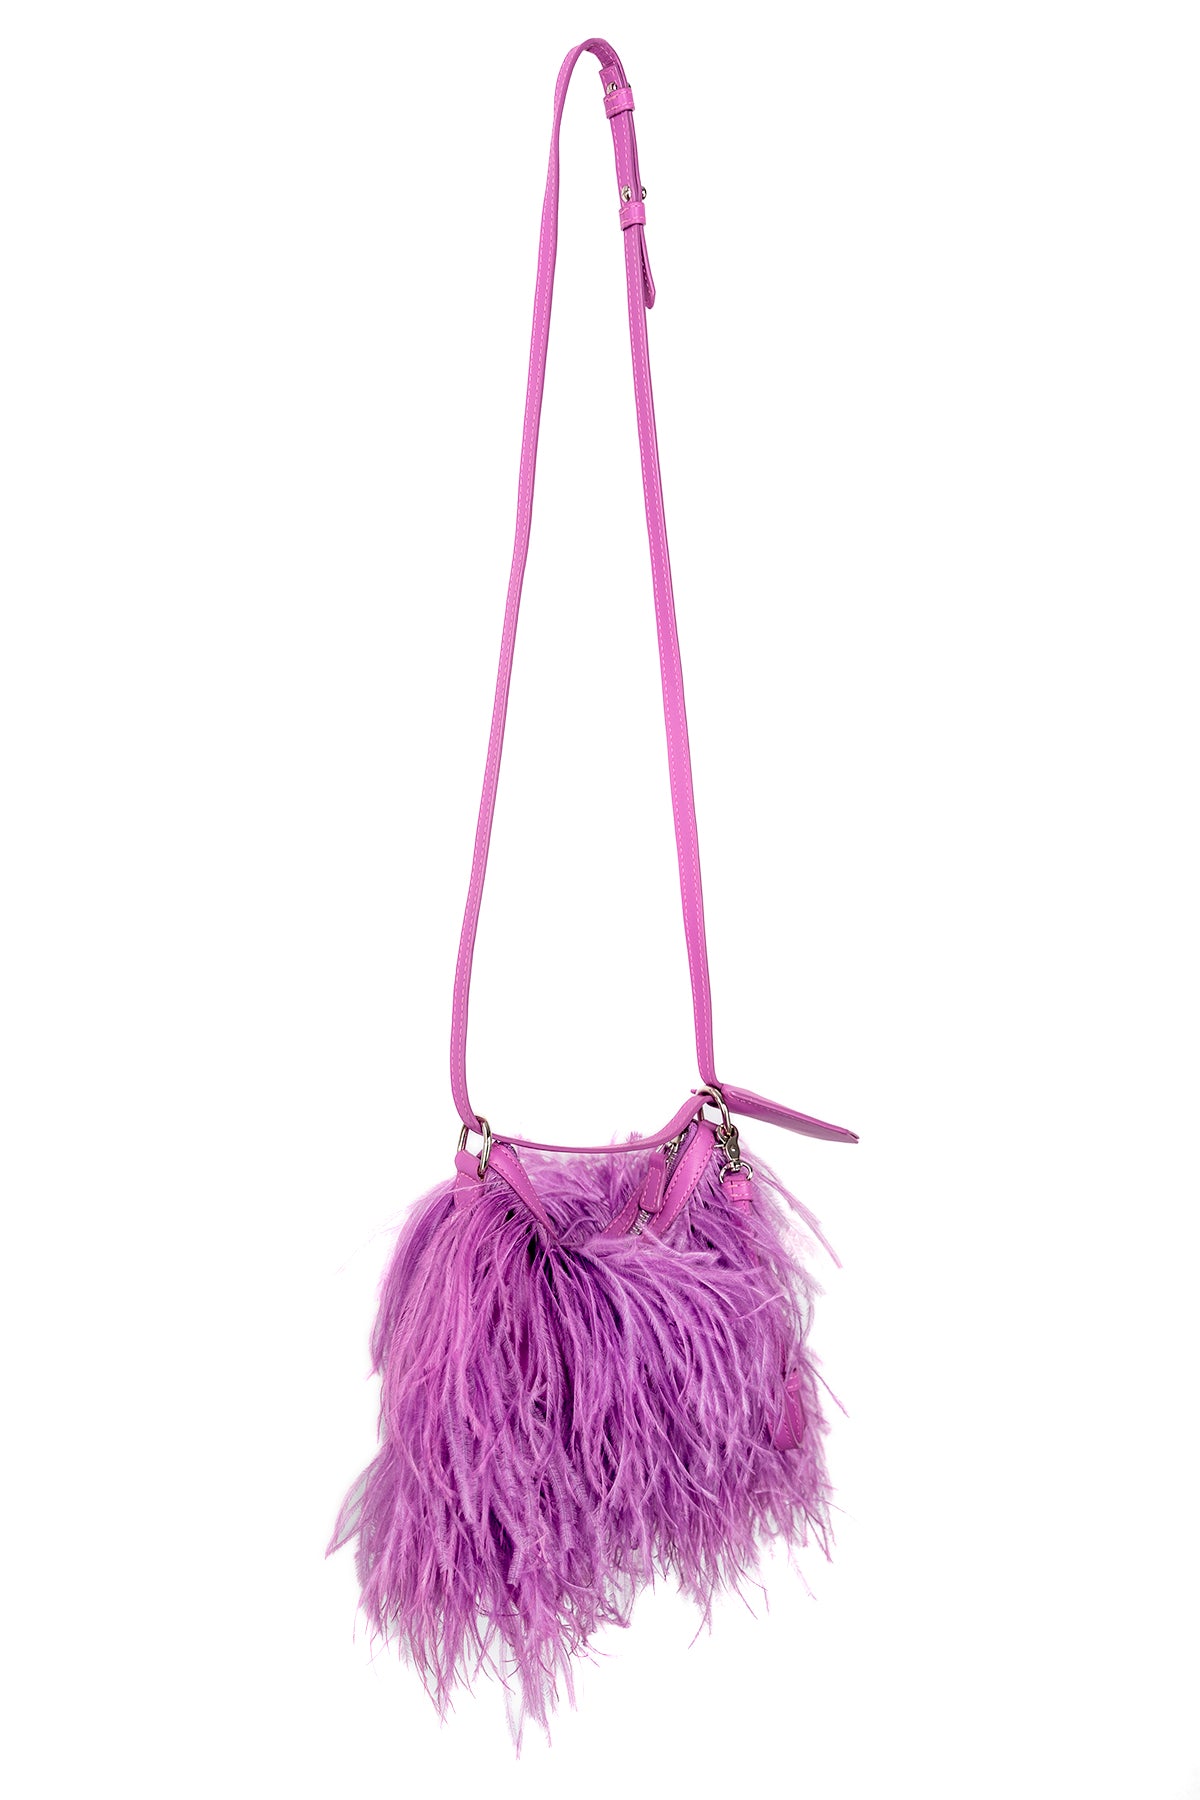 LILAC FEATHER BAG